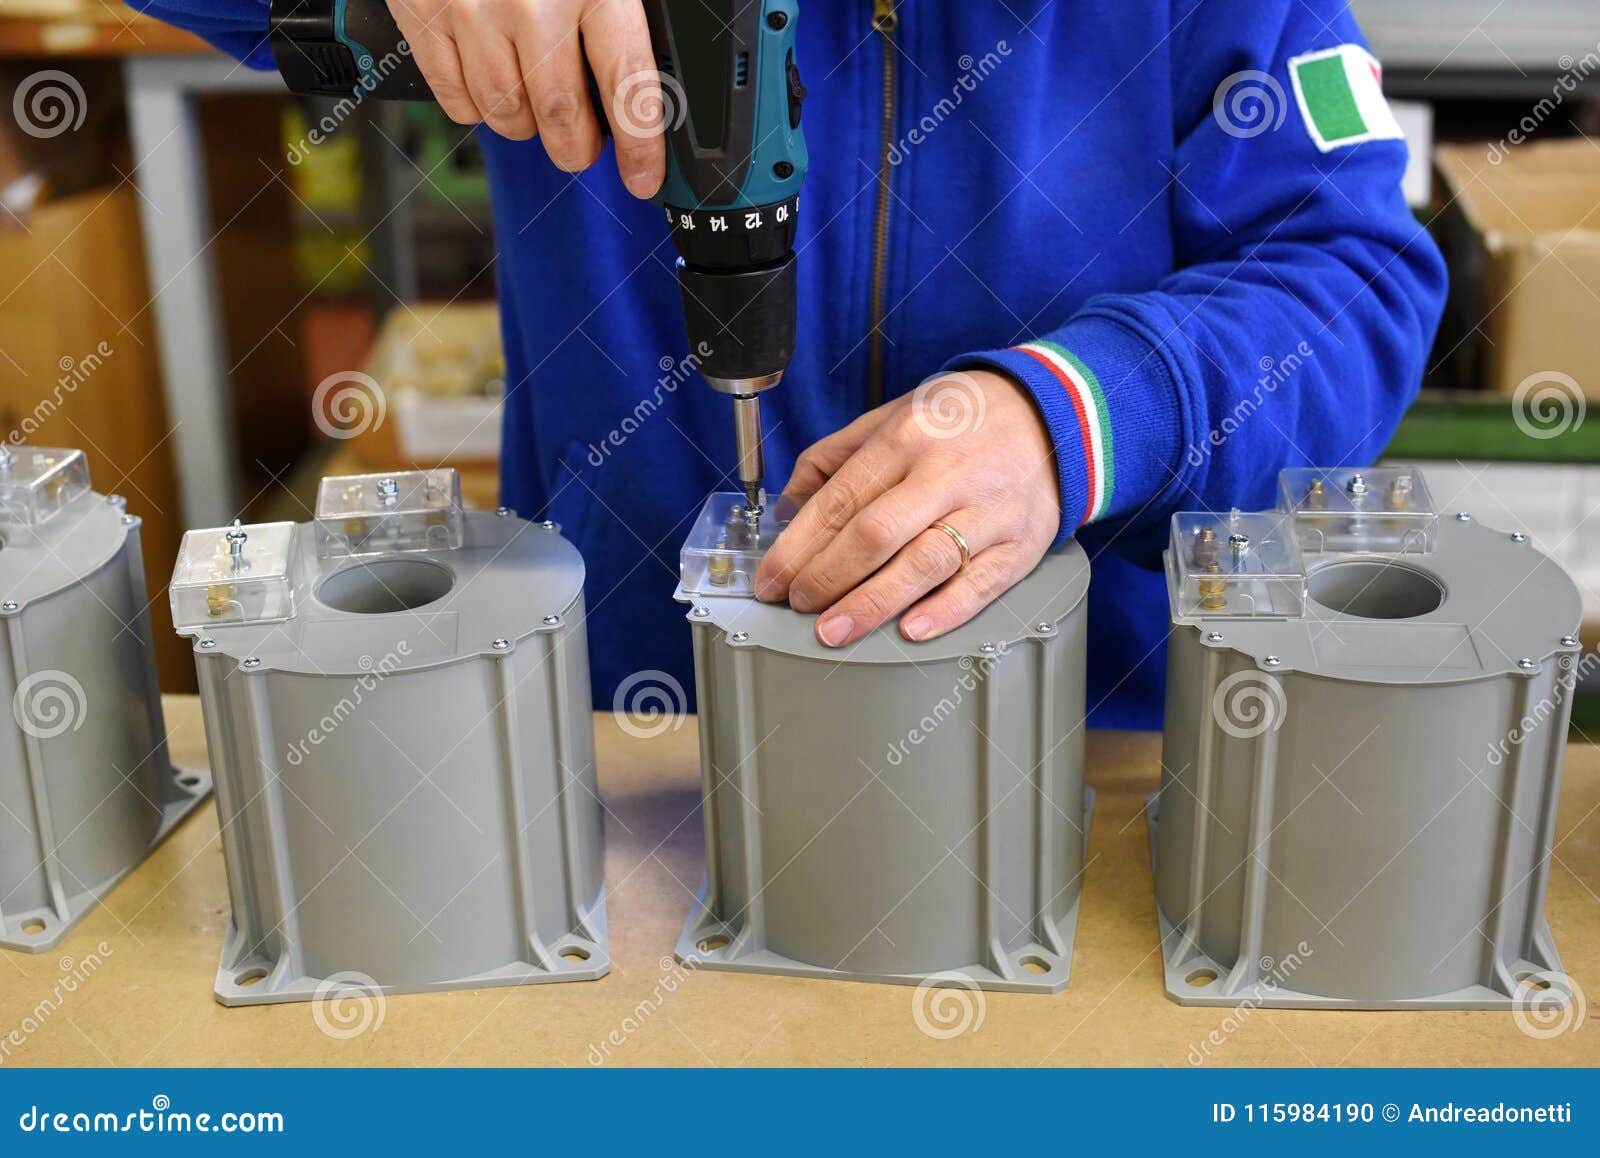 man working with gun at assembly line